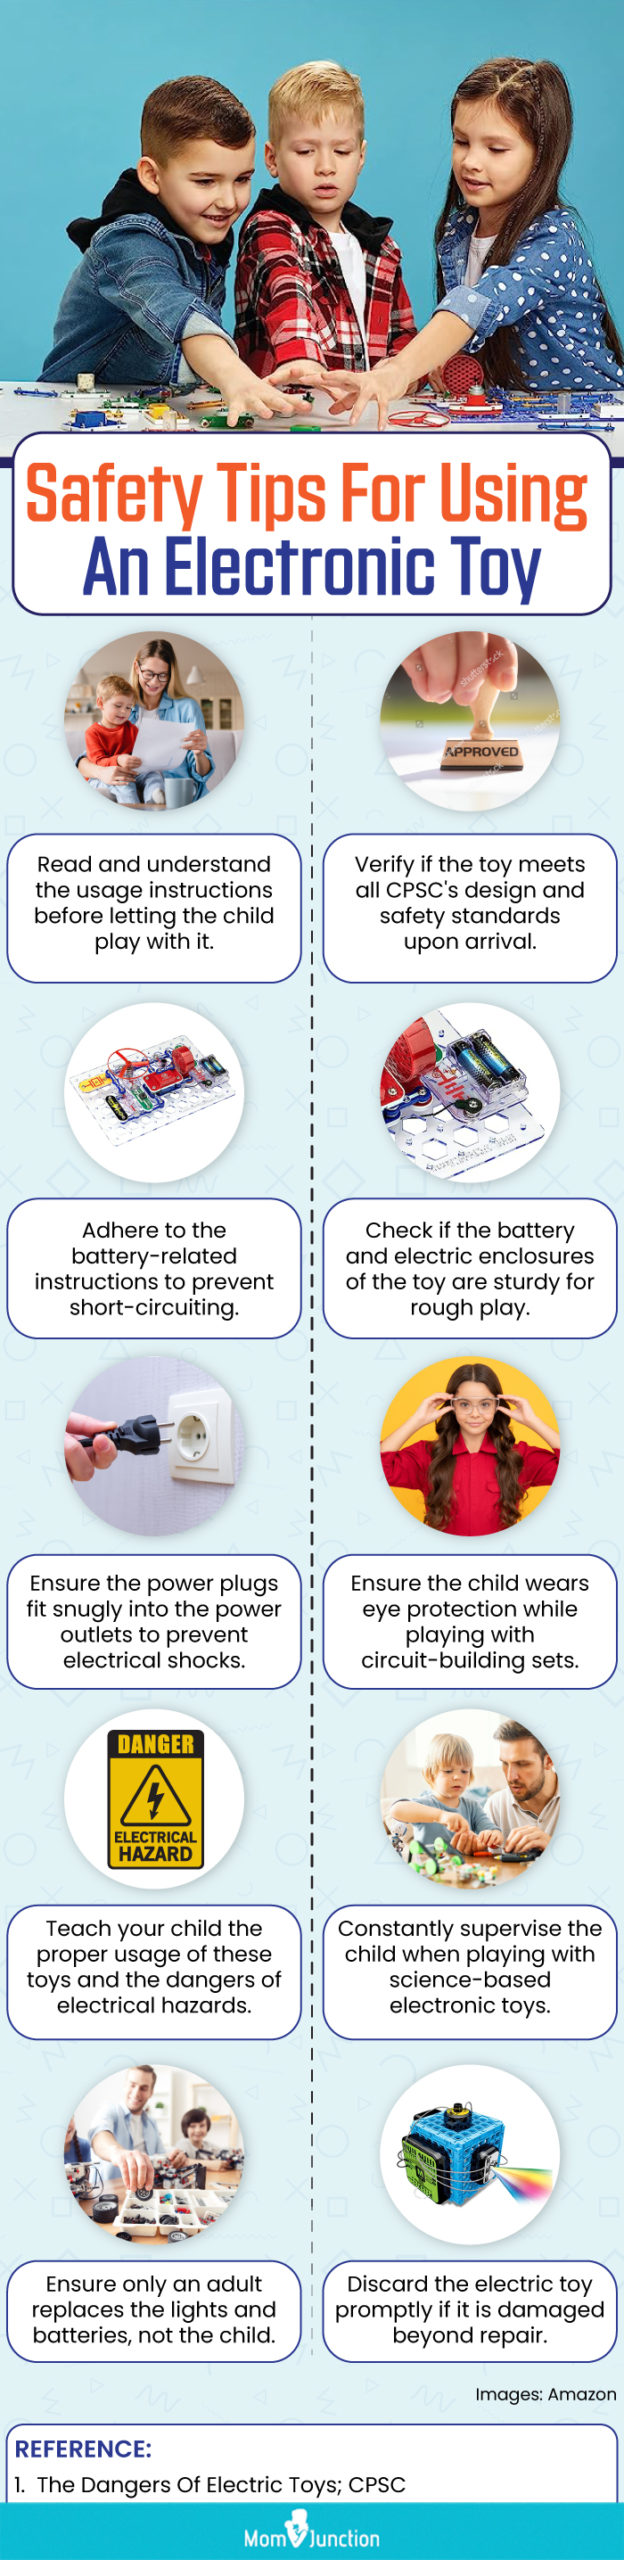 Safety Tips For Using An Electronic Toy (infographic)